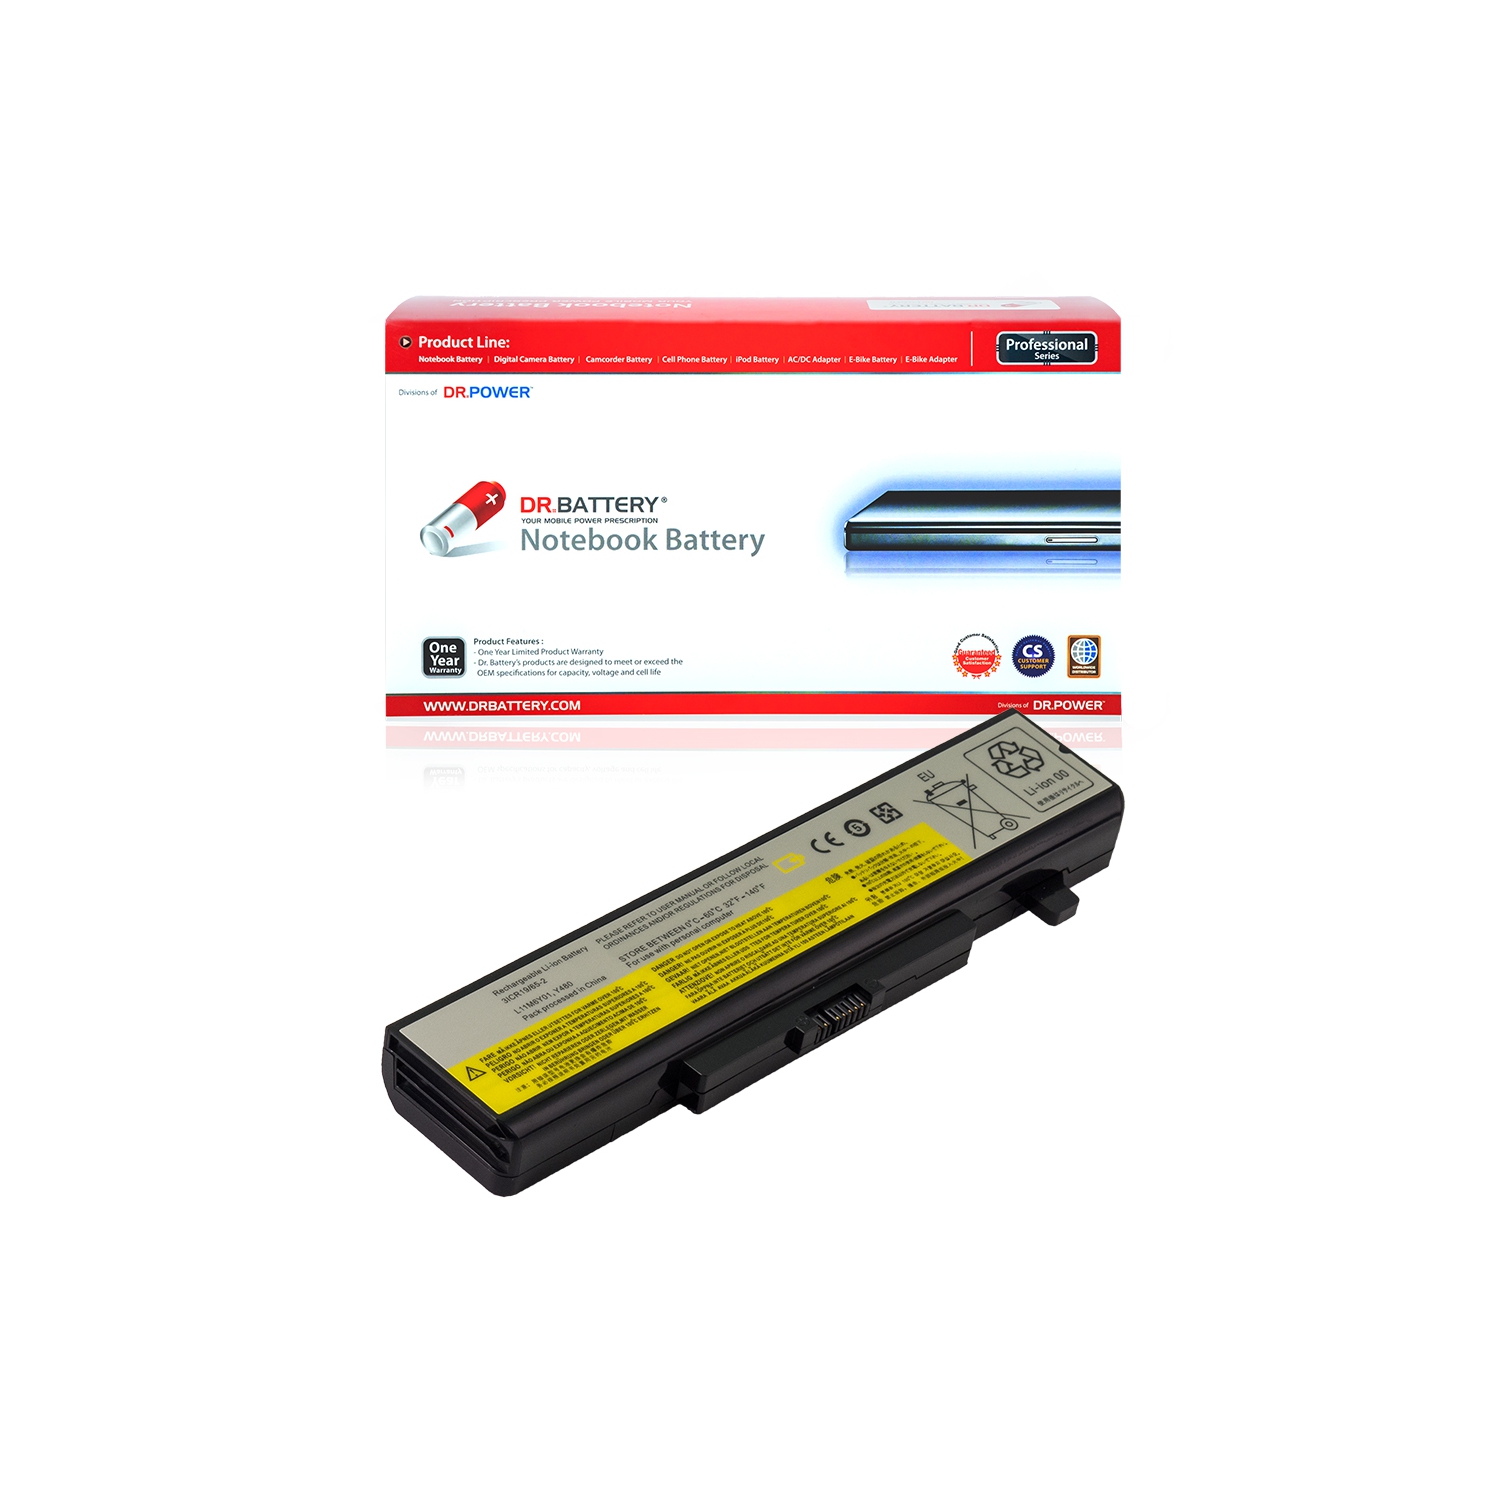 DR. BATTERY - Replacement for Lenovo IdeaPad Y480P / Y485 / Y580 / Y580P / Z380 / L11M6F01 / L11M6Y01 / L11N6R01 / L11N6Y01